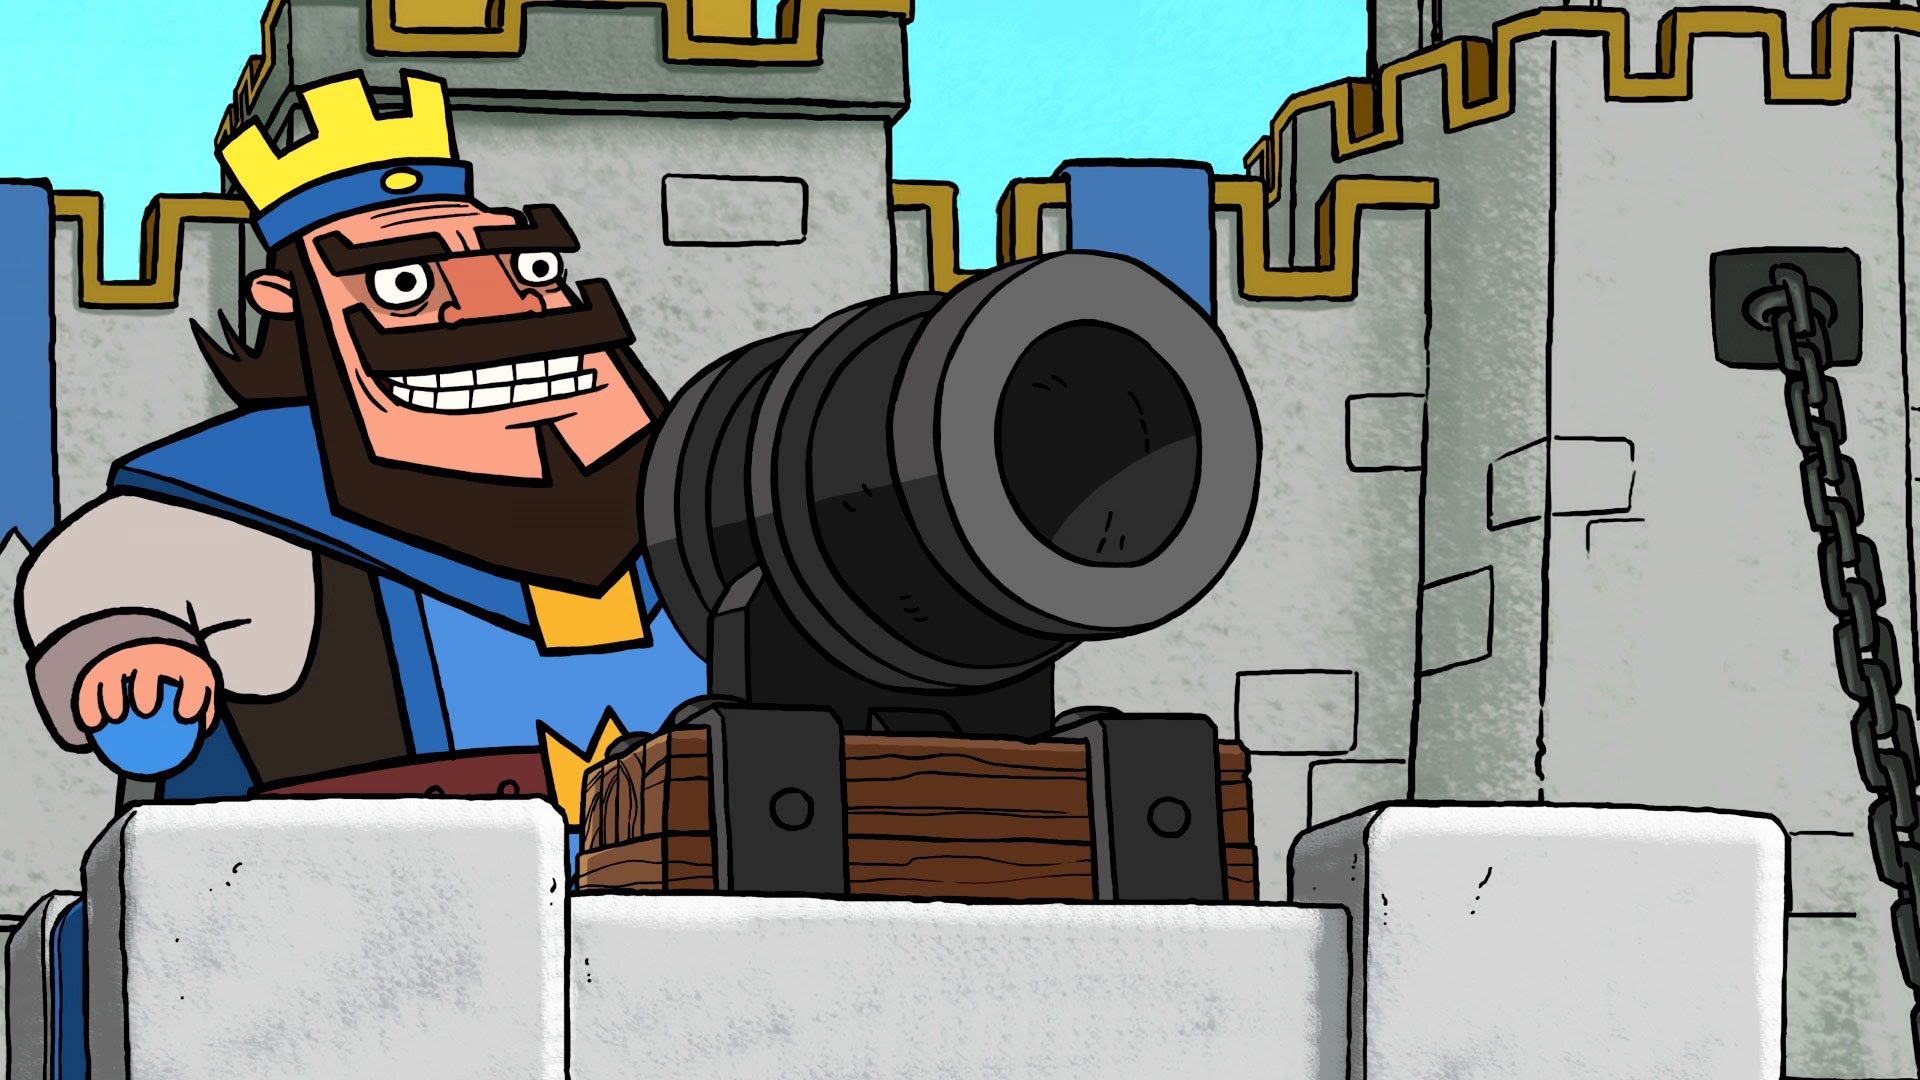 Watch This Clash Royale Animated Short